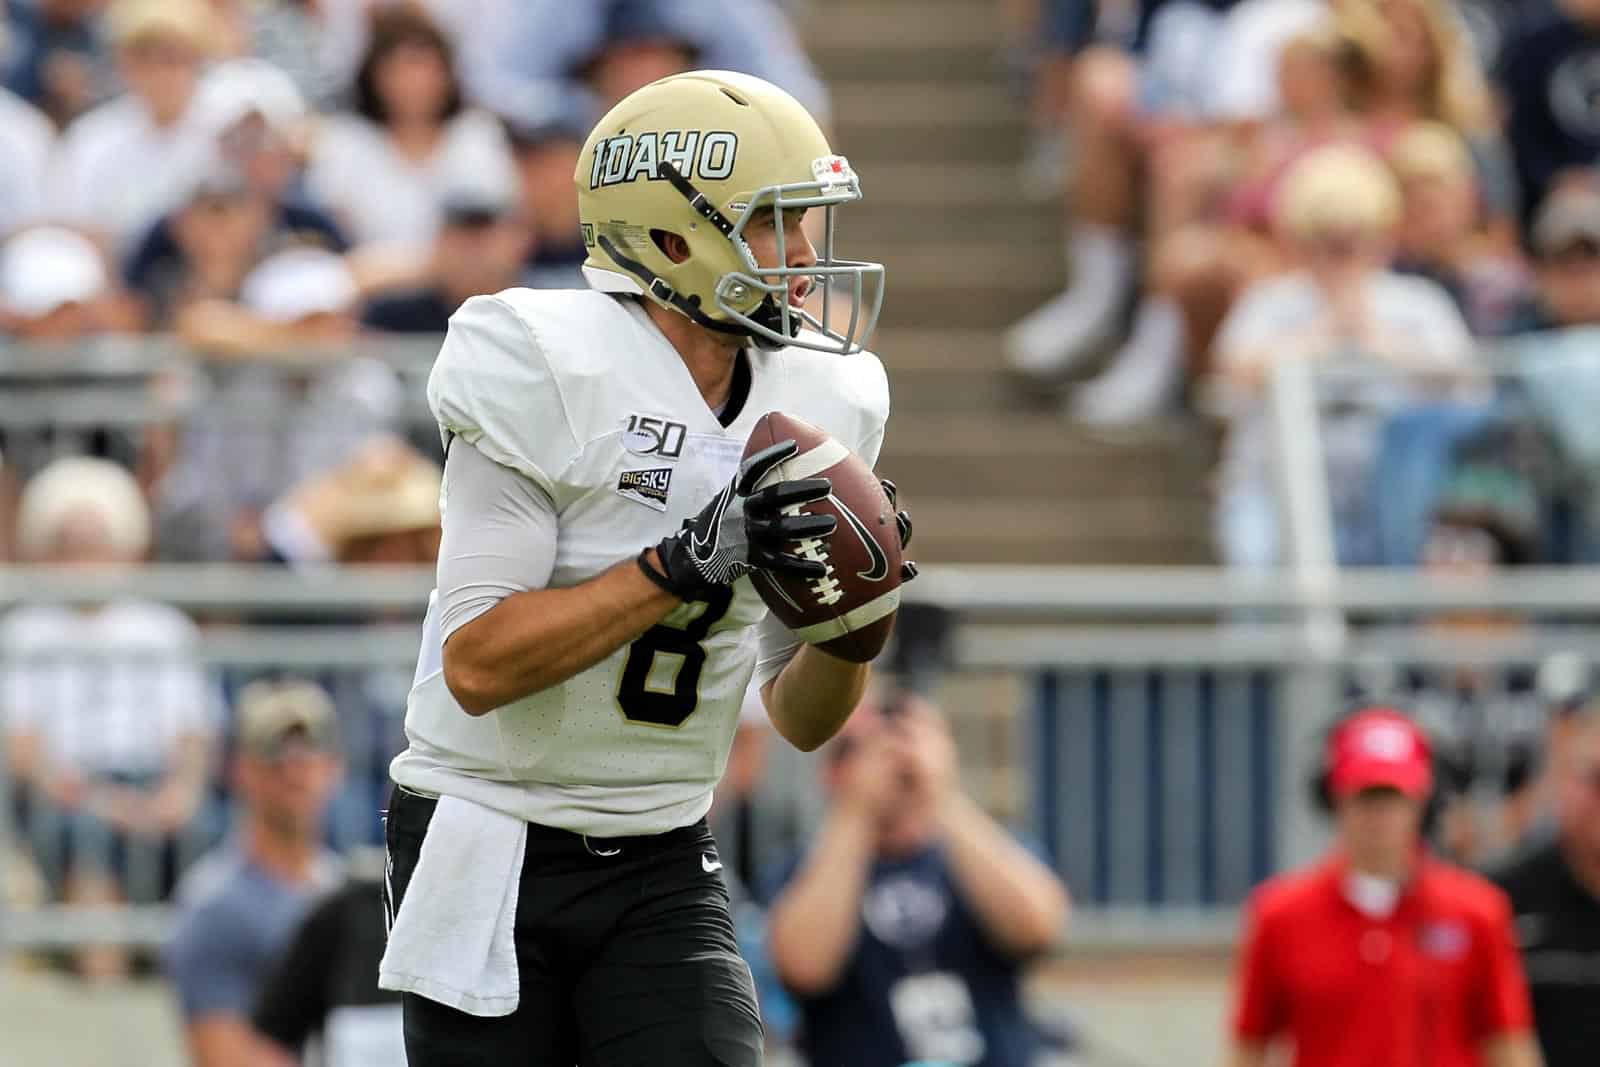 Idaho Vandals Football Schedule 2022 Idaho To Host Drake In 2022, Play At Nevada In 2023